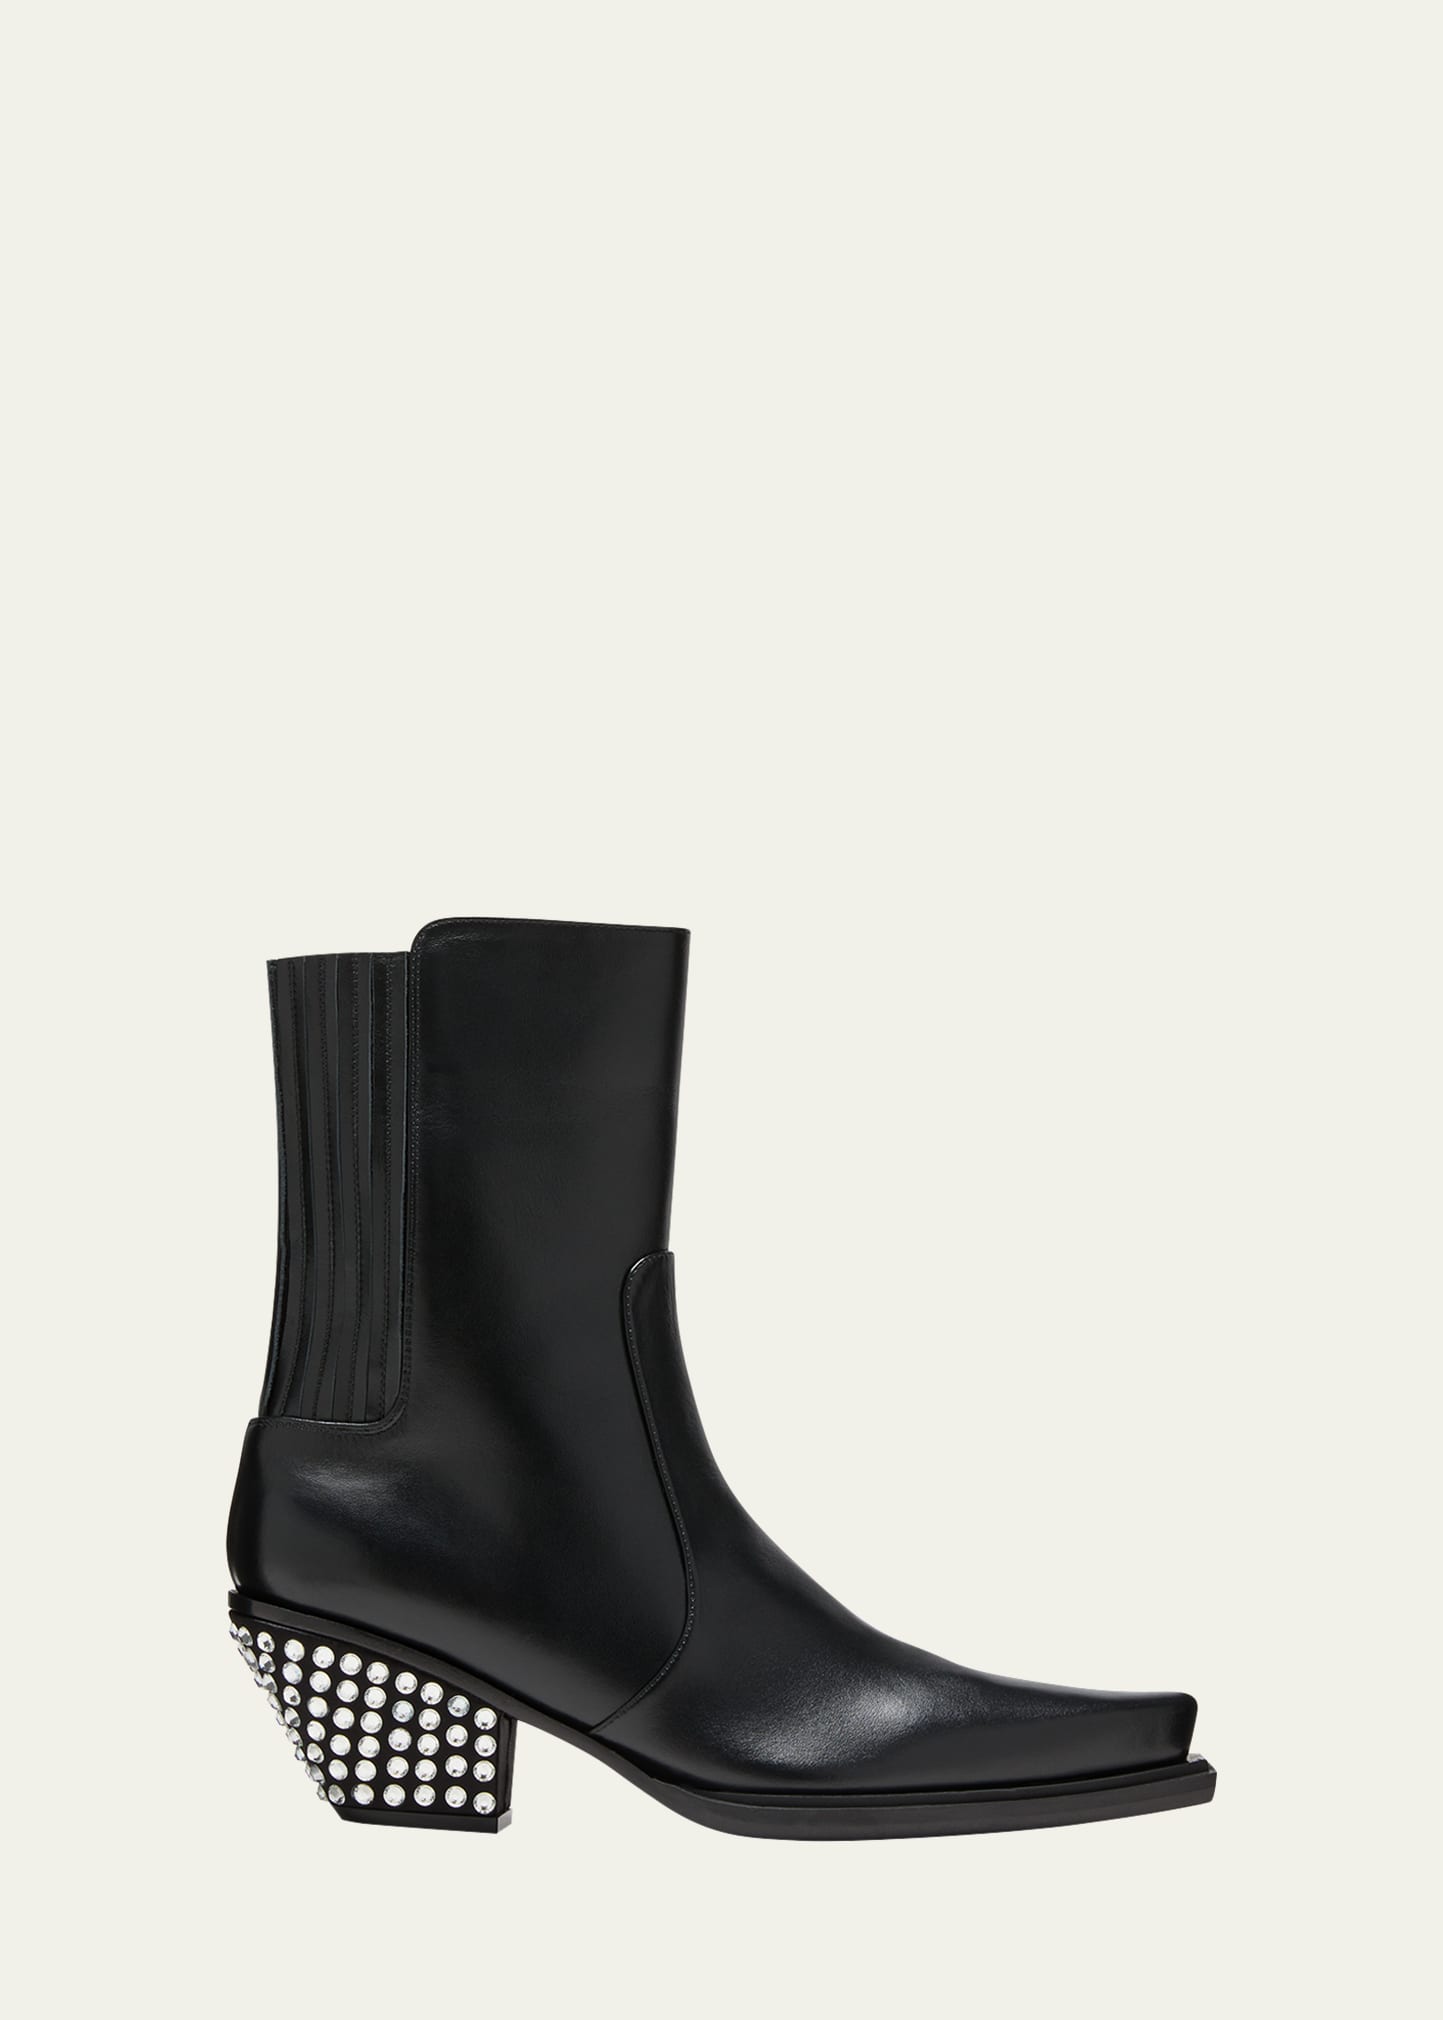 GIUSEPPE ZANOTTI POINTED CRYSTAL LEATHER WESTERN BOOTS